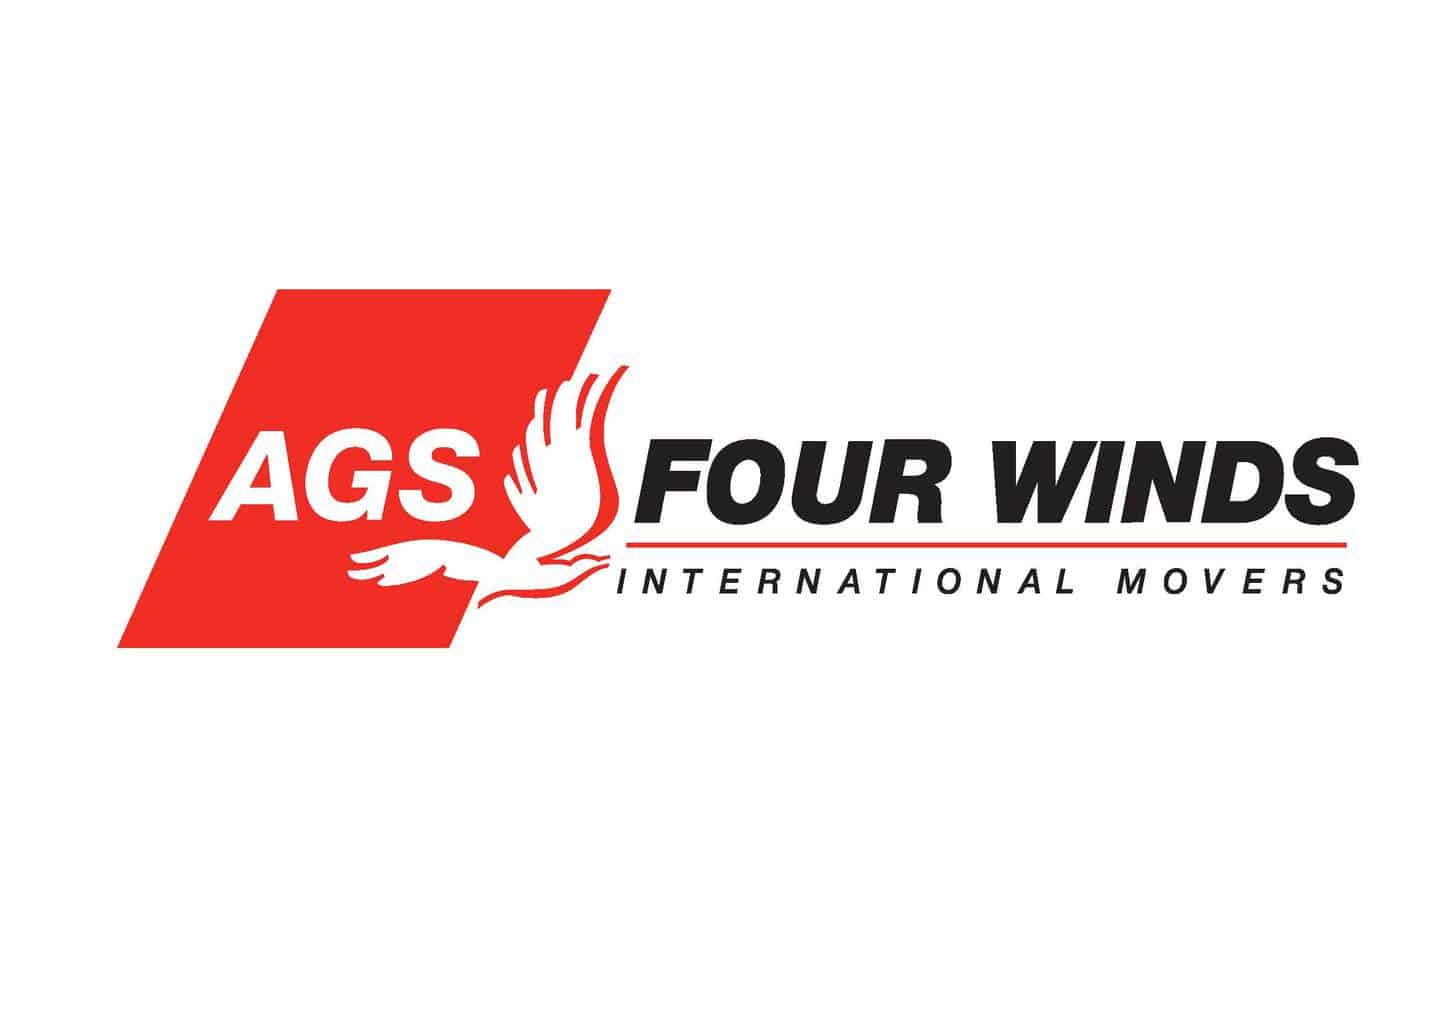 Featured image for “AGS Four Winds International Movers”